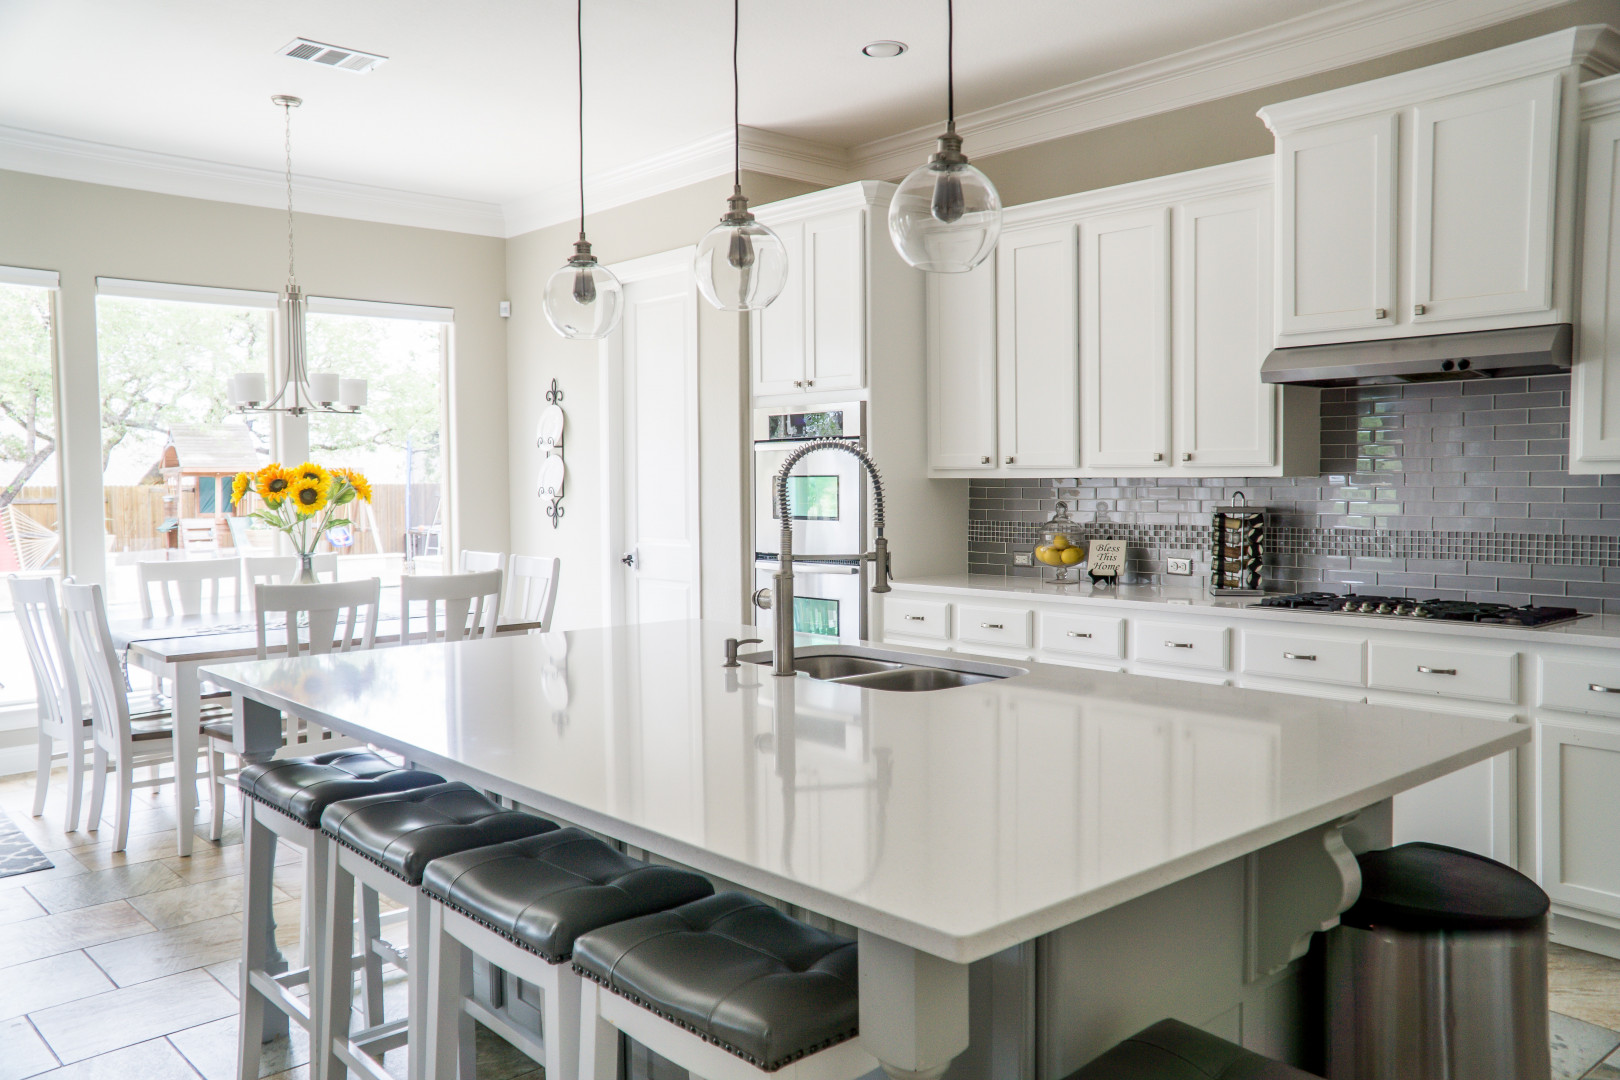 How to Refinish Kitchen Cabinets to Make Them Look Brand New